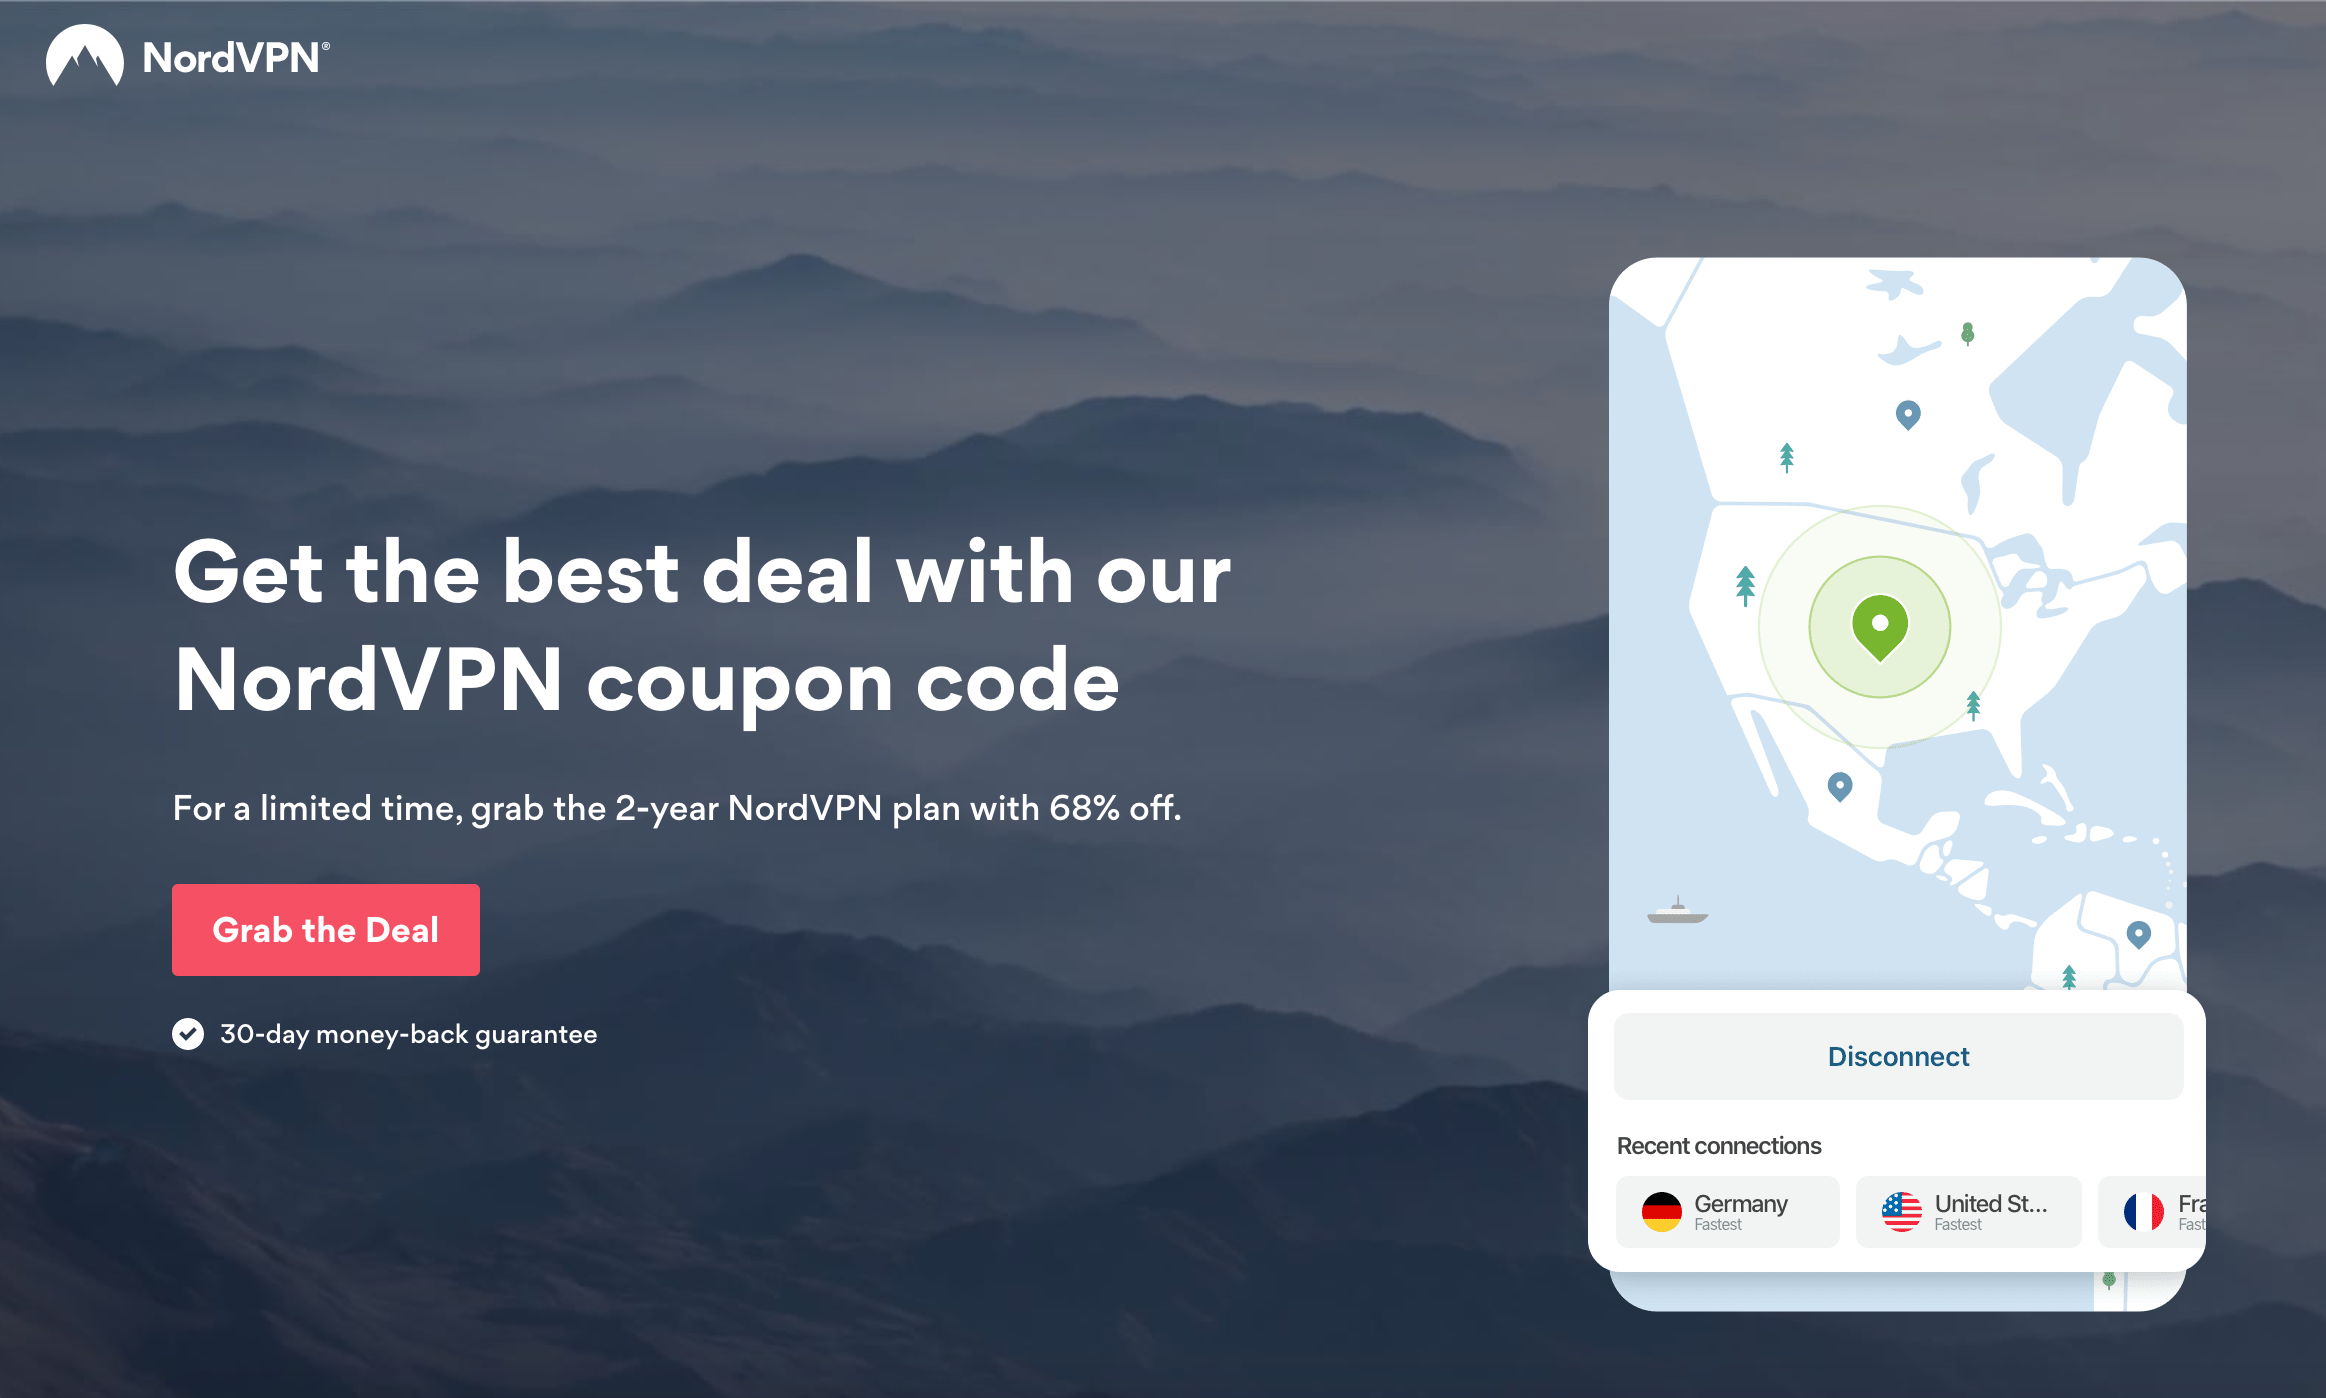 Just one click and your browsing is secure with NordVPN